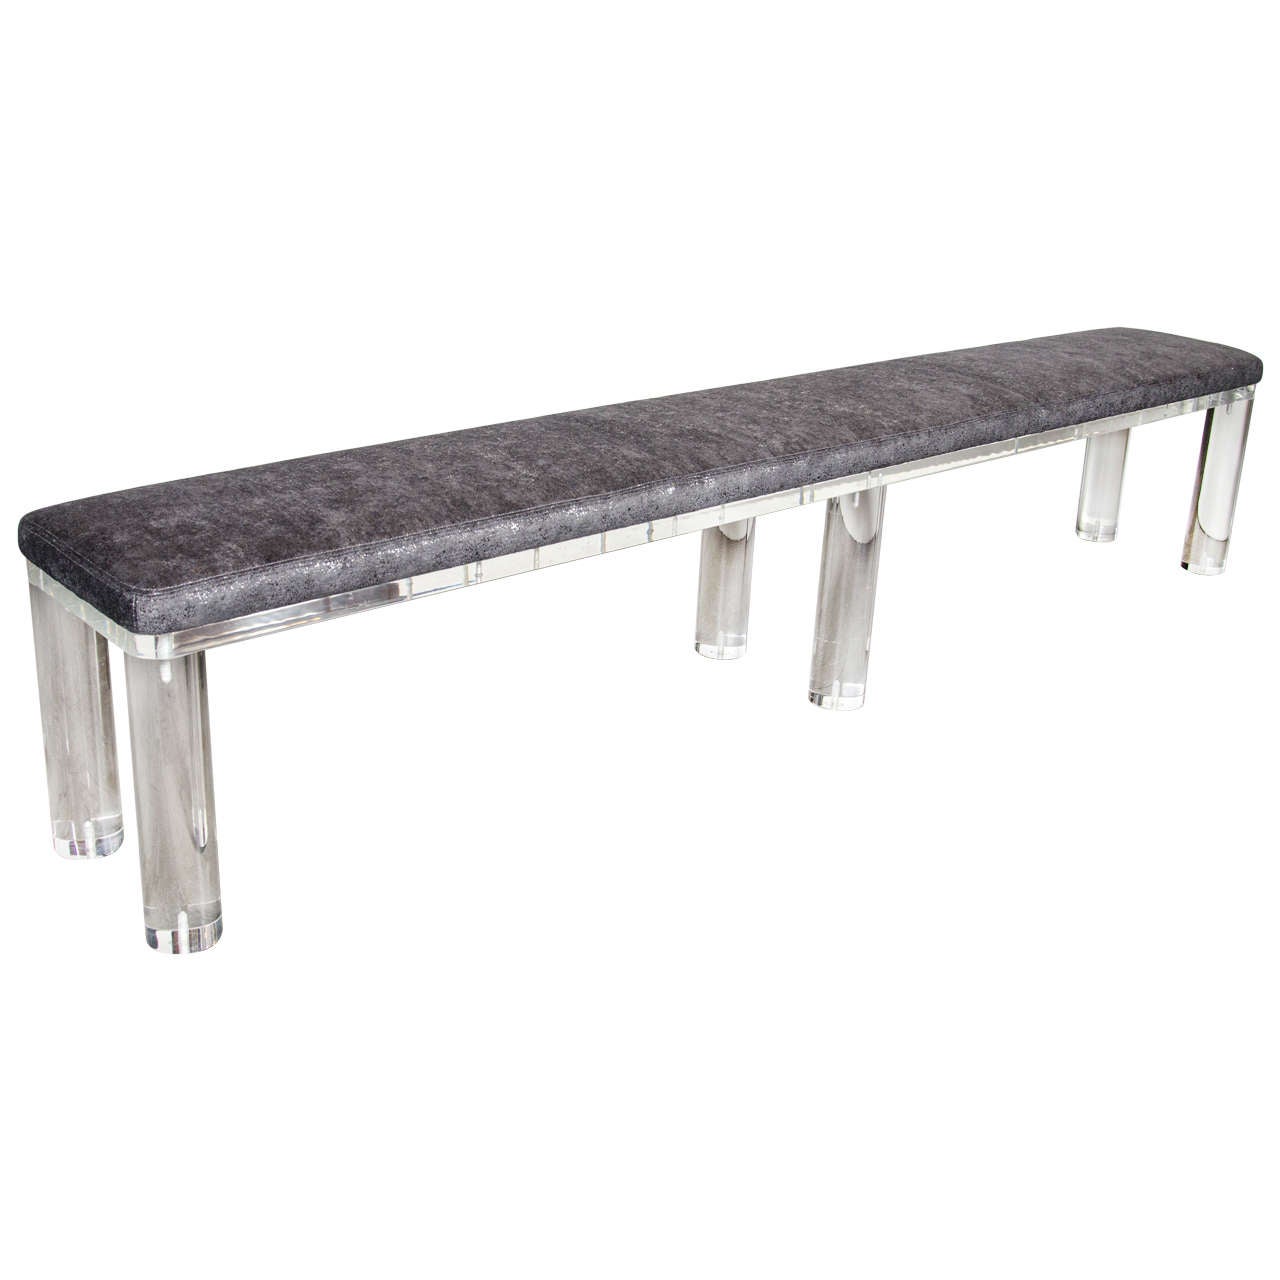 Ultra Chic Mid-Century Modernist Lucite Bench with Faux Shagreen Upholstery